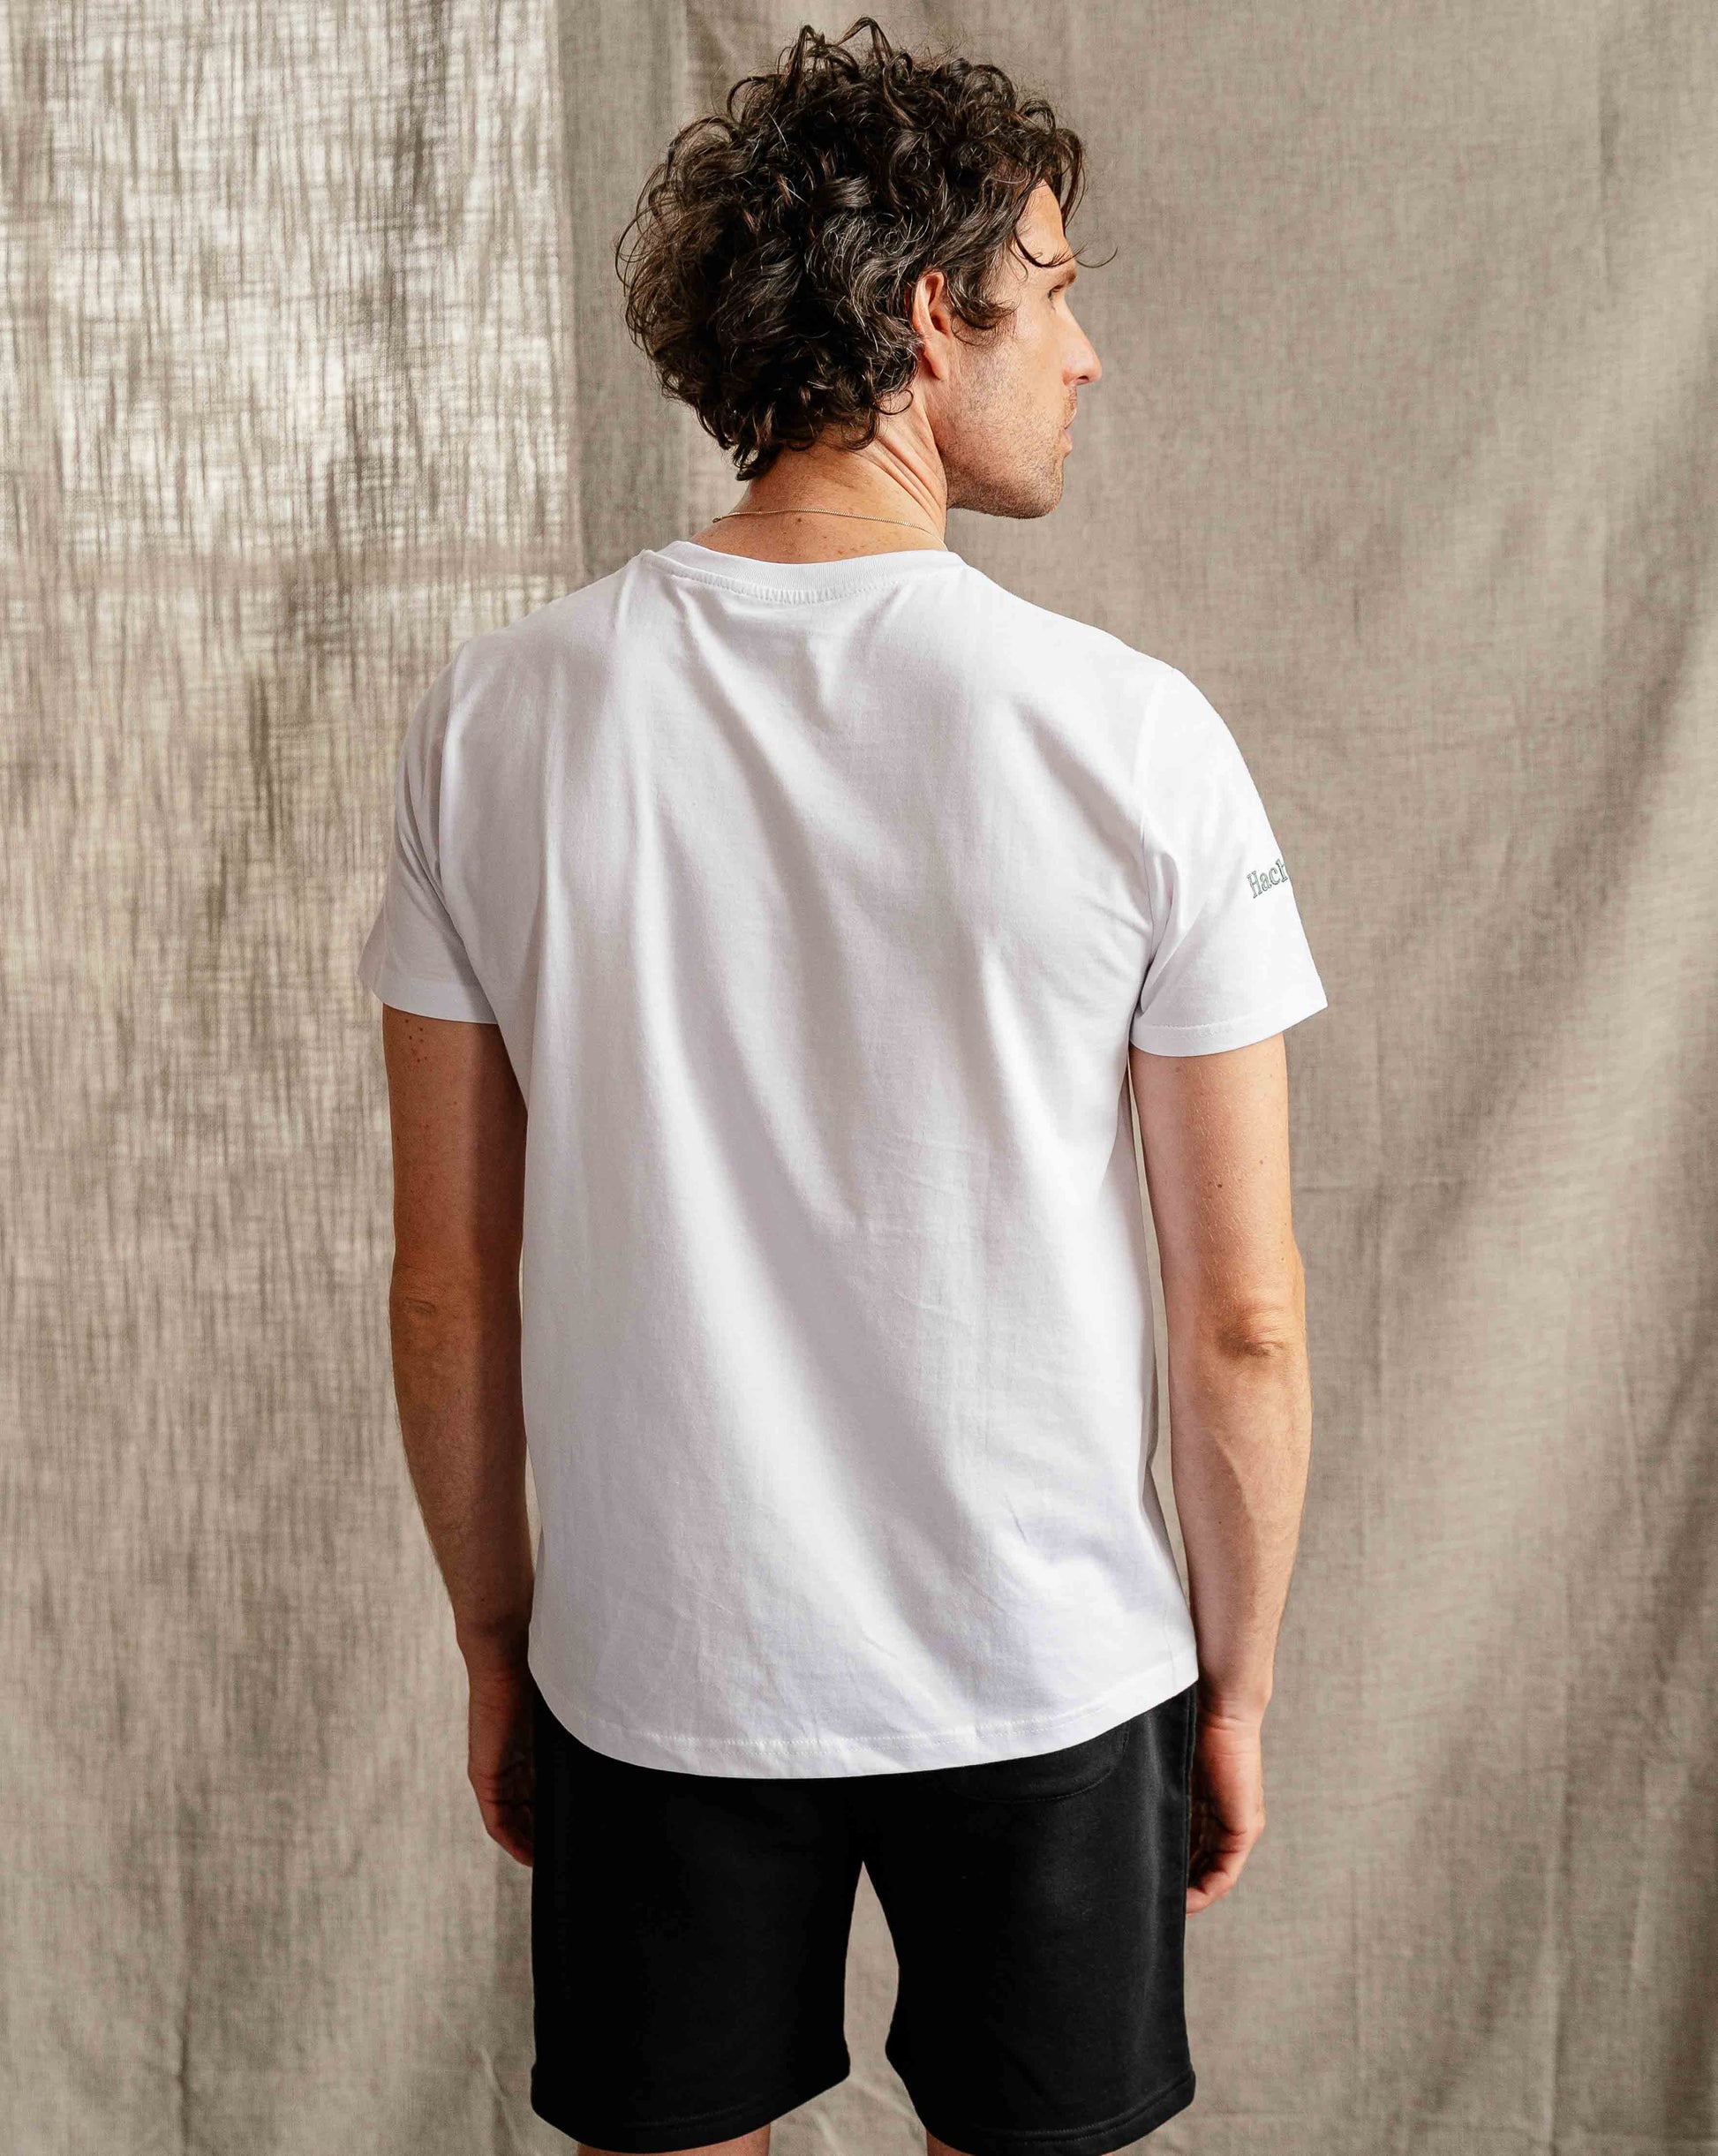 Man wearing Hachure Active white t-shirt with green logo embroidery 